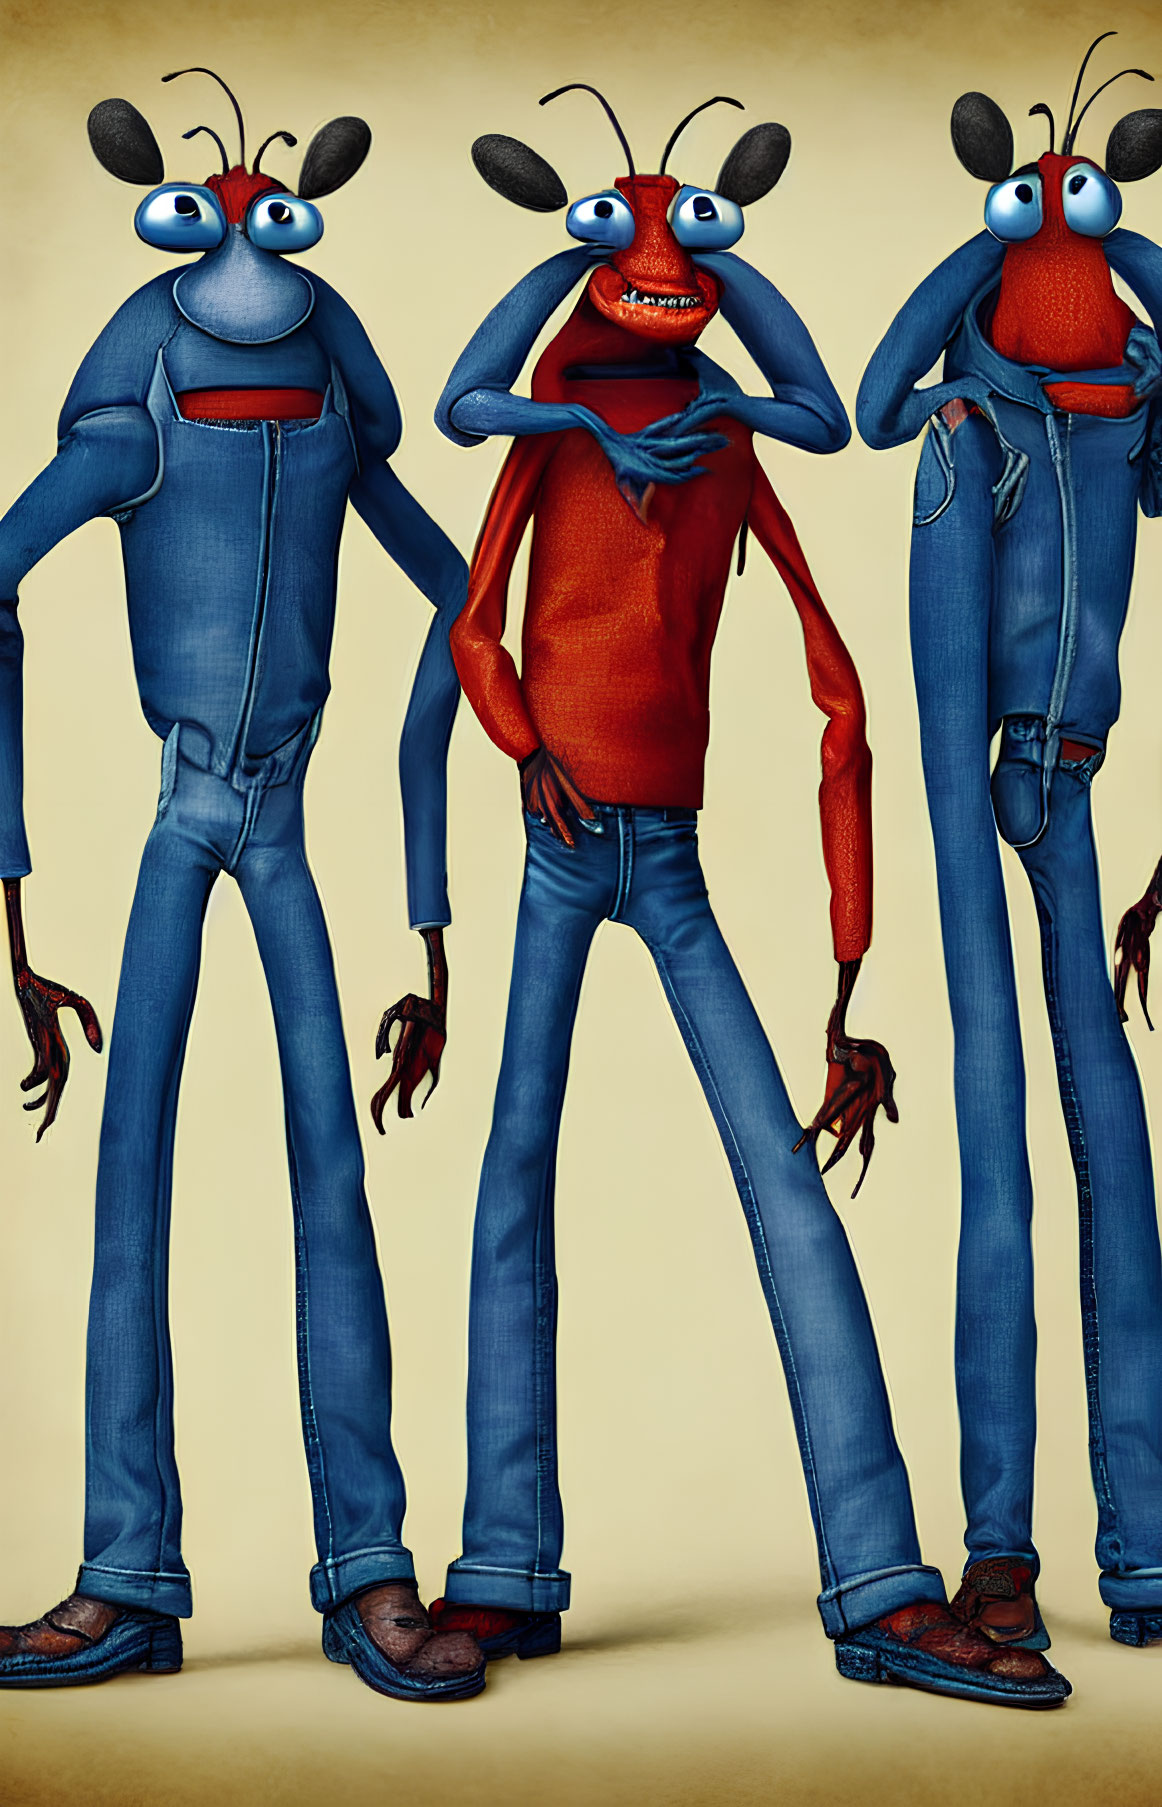 Anthropomorphic insect characters in denim attire on beige backdrop